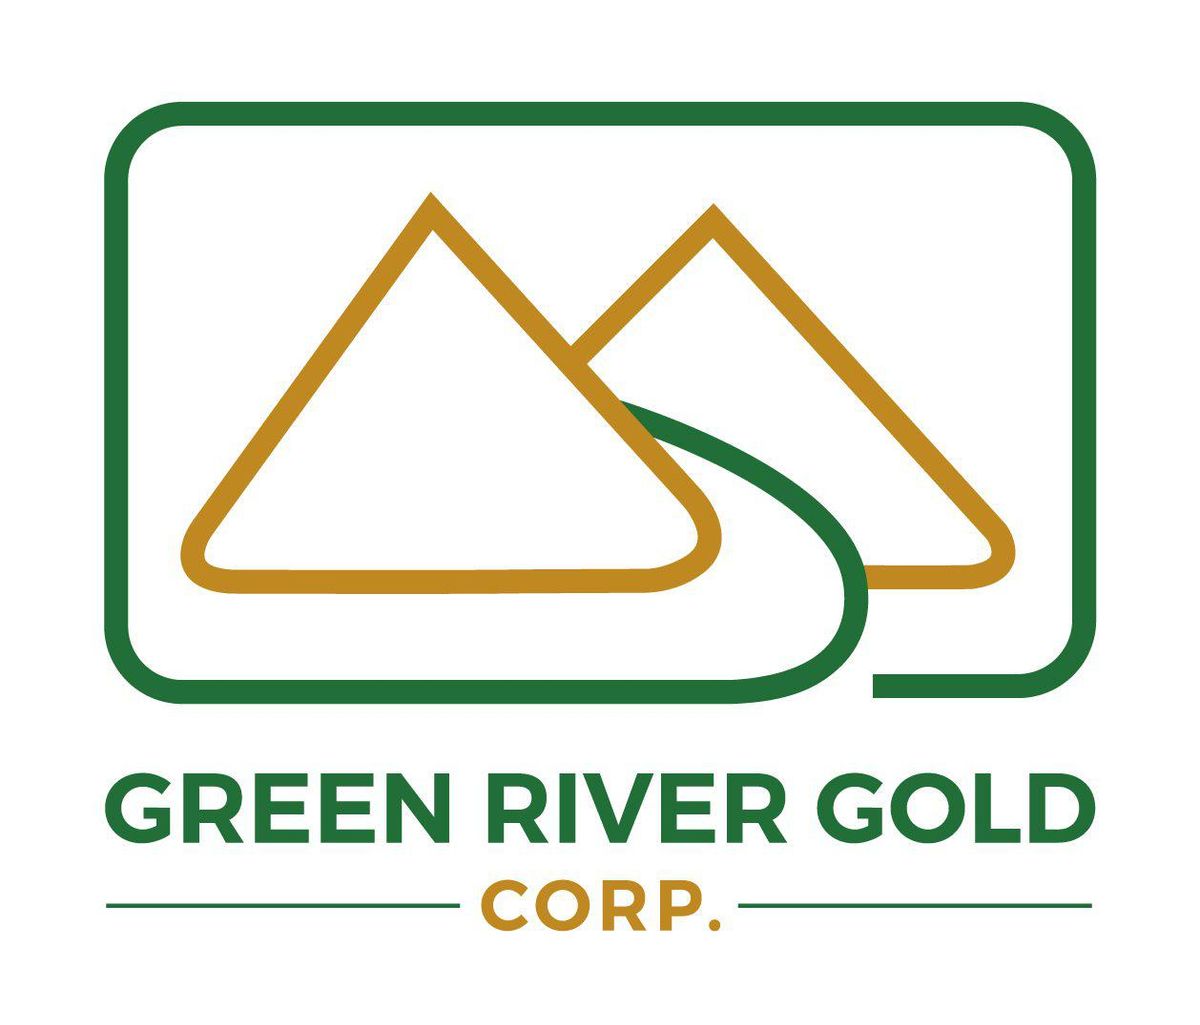 Green River Gold Corp. Commissions Additional Mag Survey on the Quesnel Nickel Project